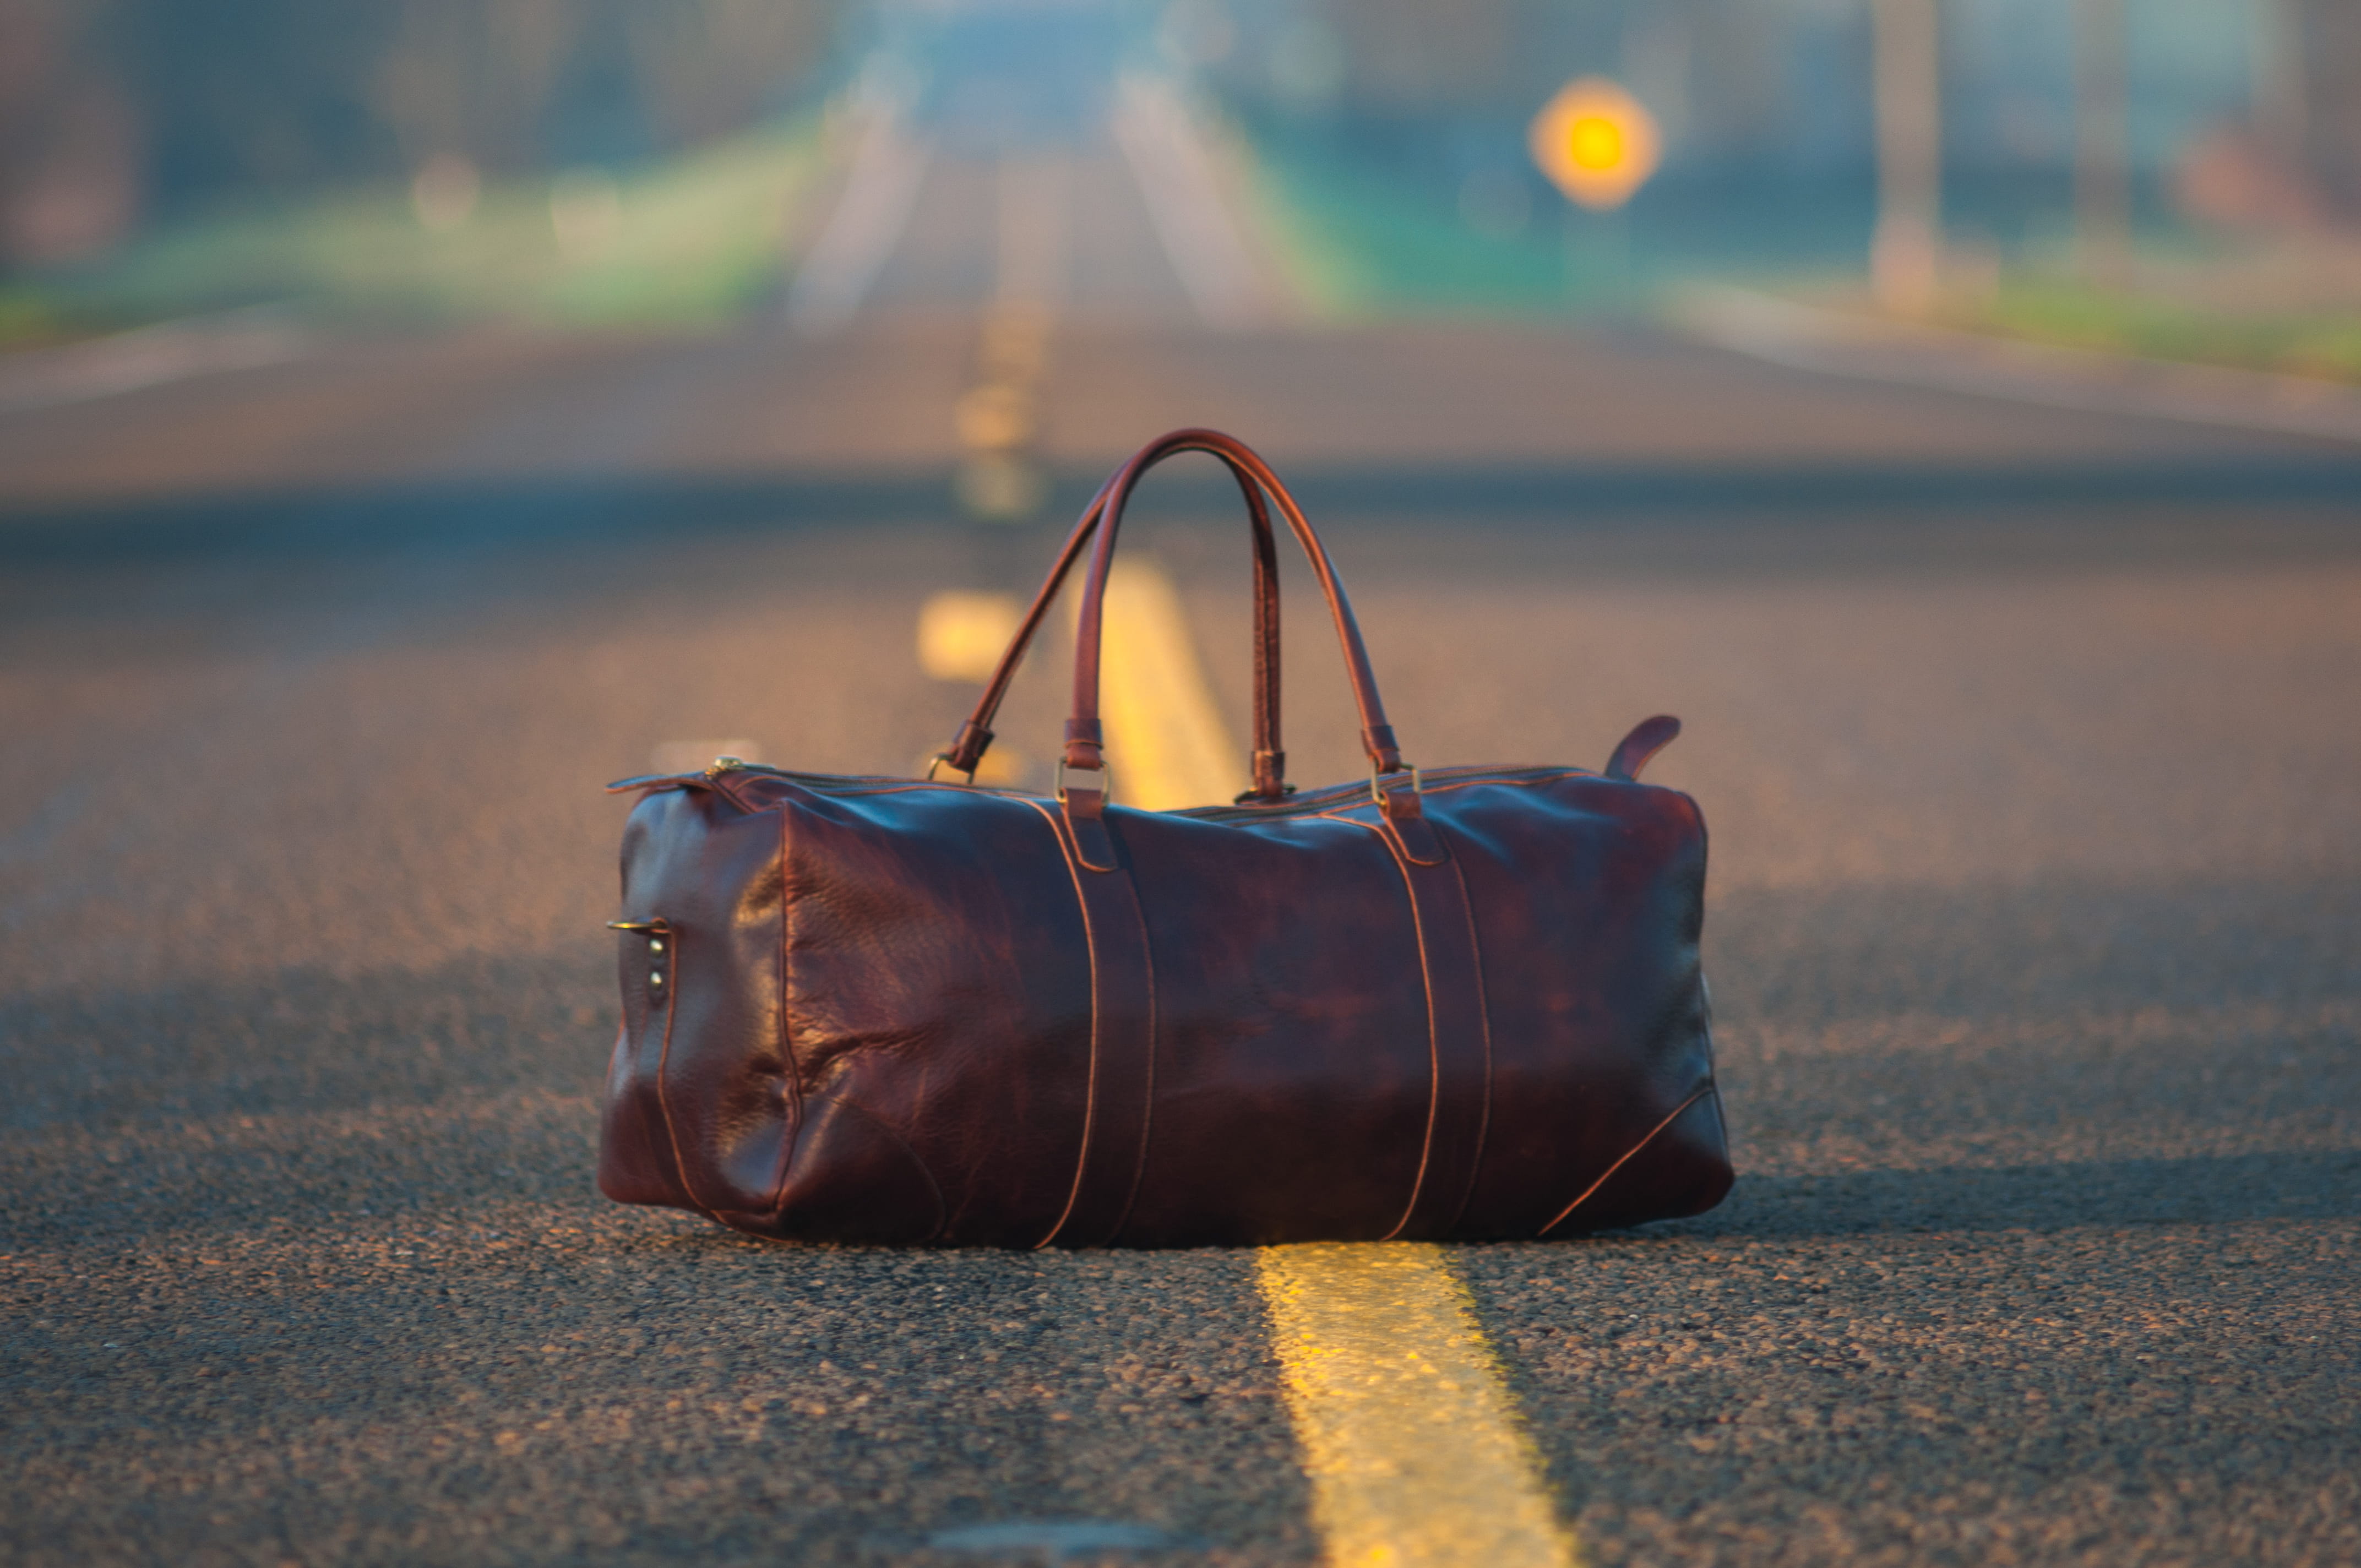 brown leather duffel bag in middle on gray asphalt road, focus on foreground